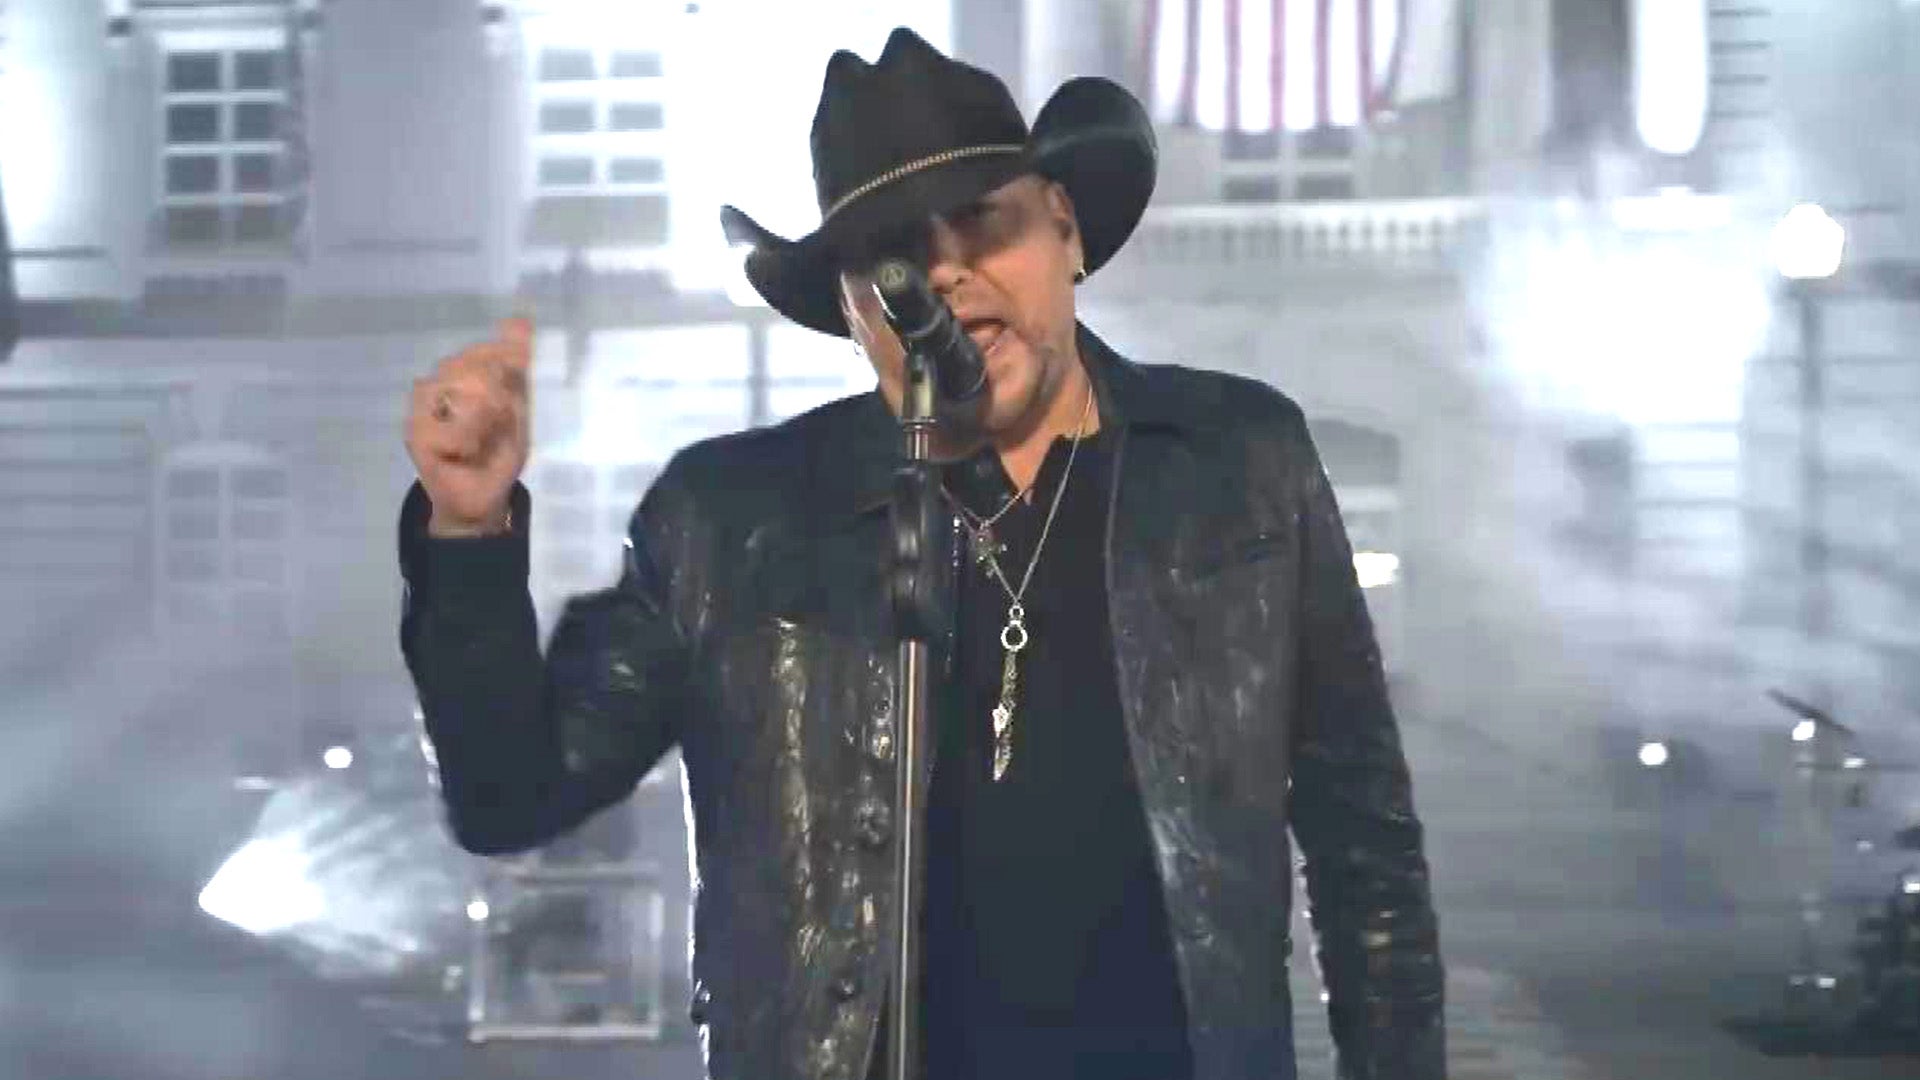 Jason Aldean’s Controversial ‘Try That in a Small Town’ Music Video Re-Edited: What Changed